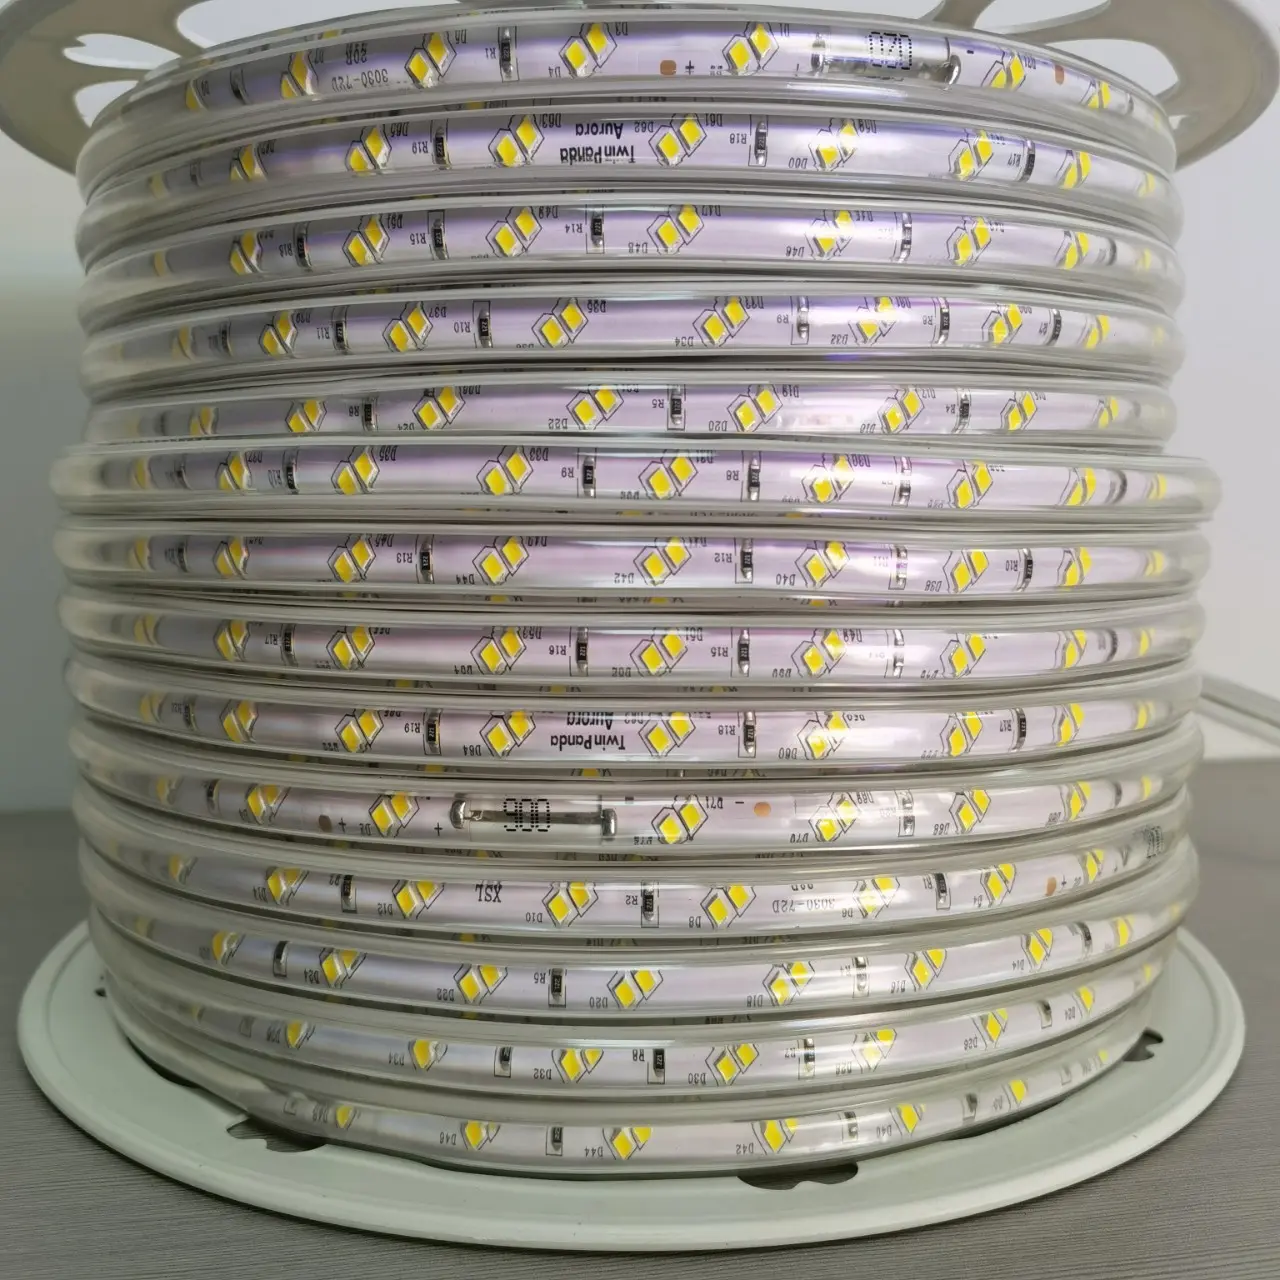 110V 220V single color Double row 72 leds strip lamp outdoor waterproof lighting